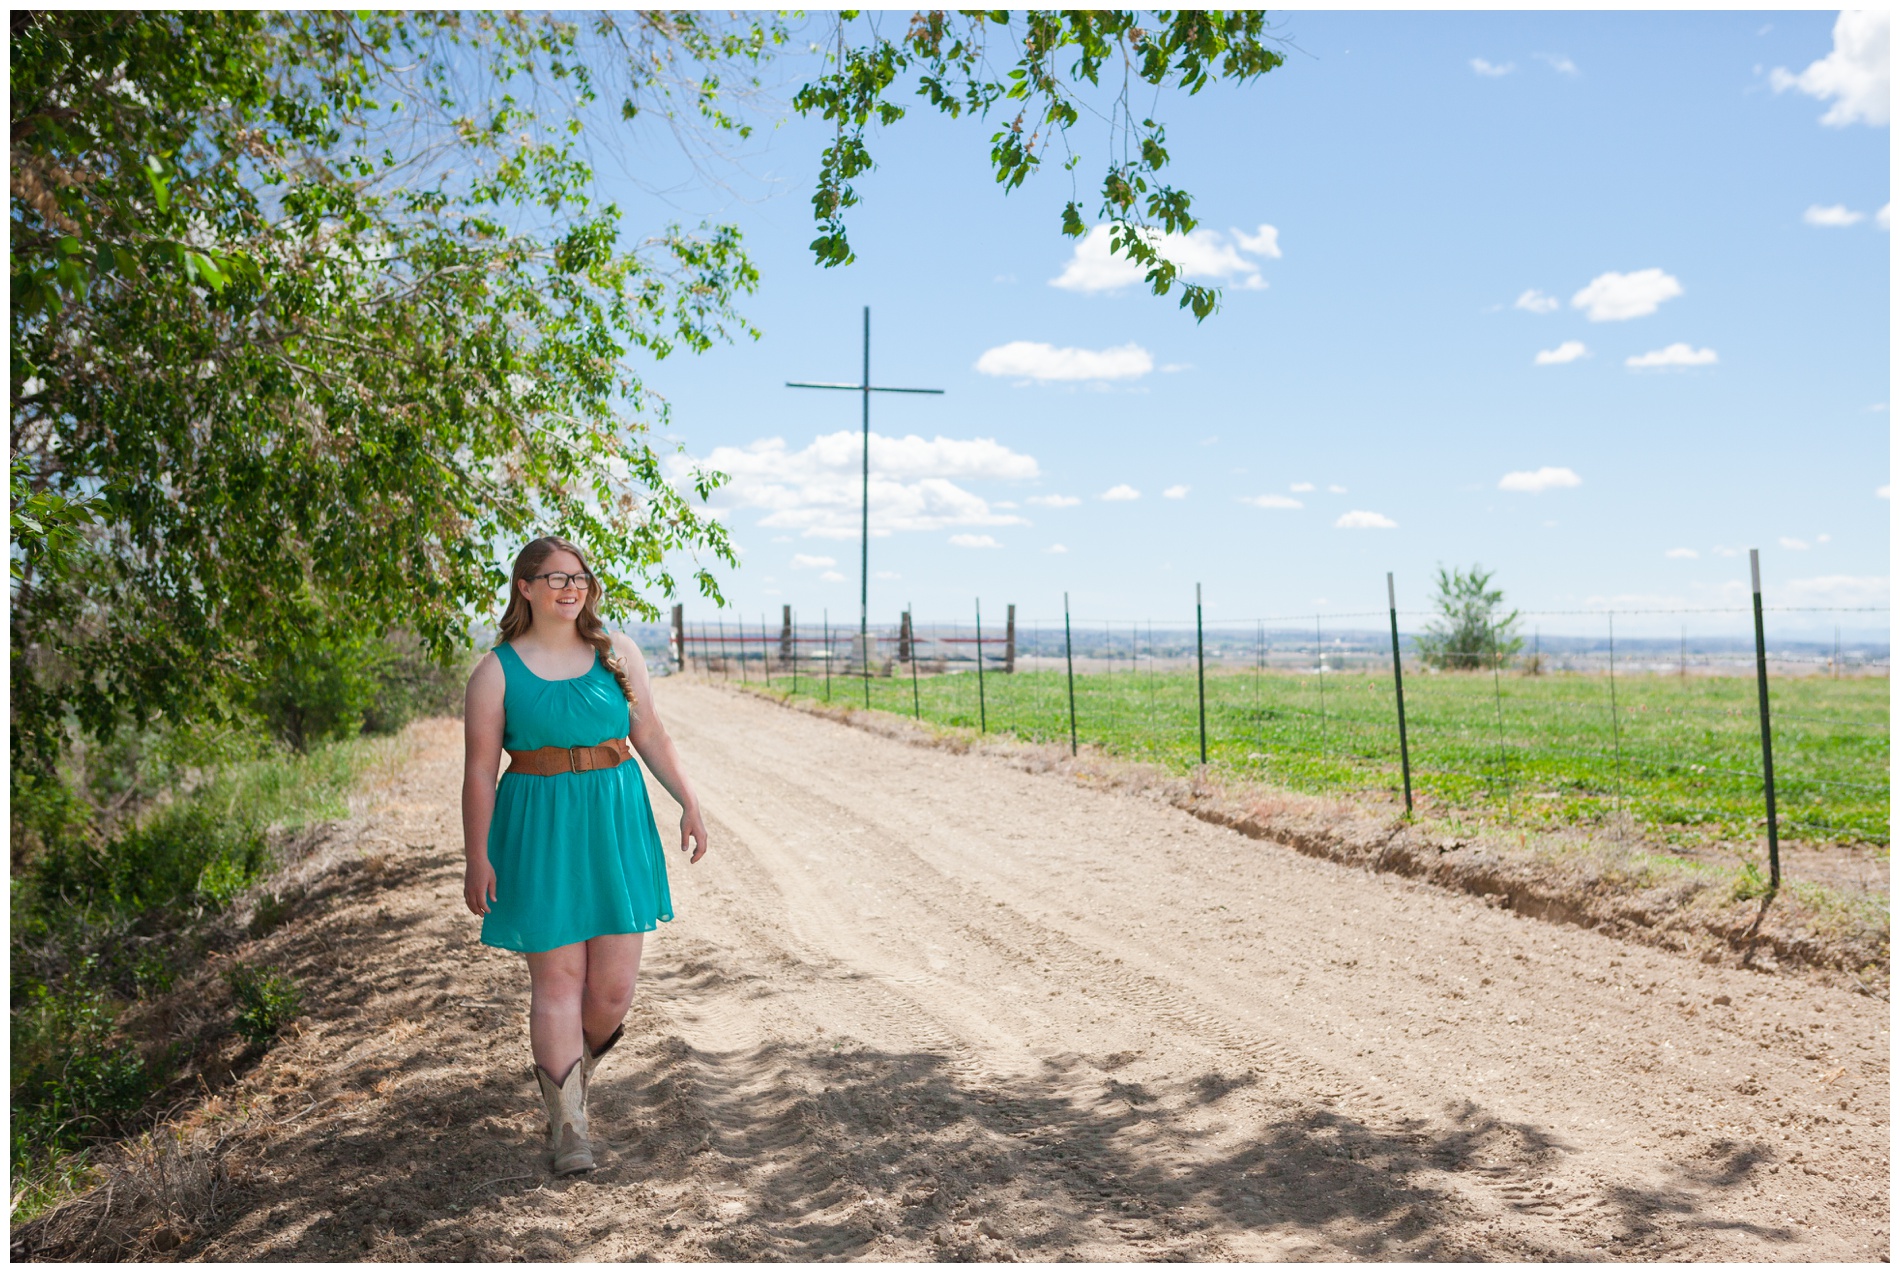 Picture of a high school senior girl walking down a dirt road with a large cross in the background.